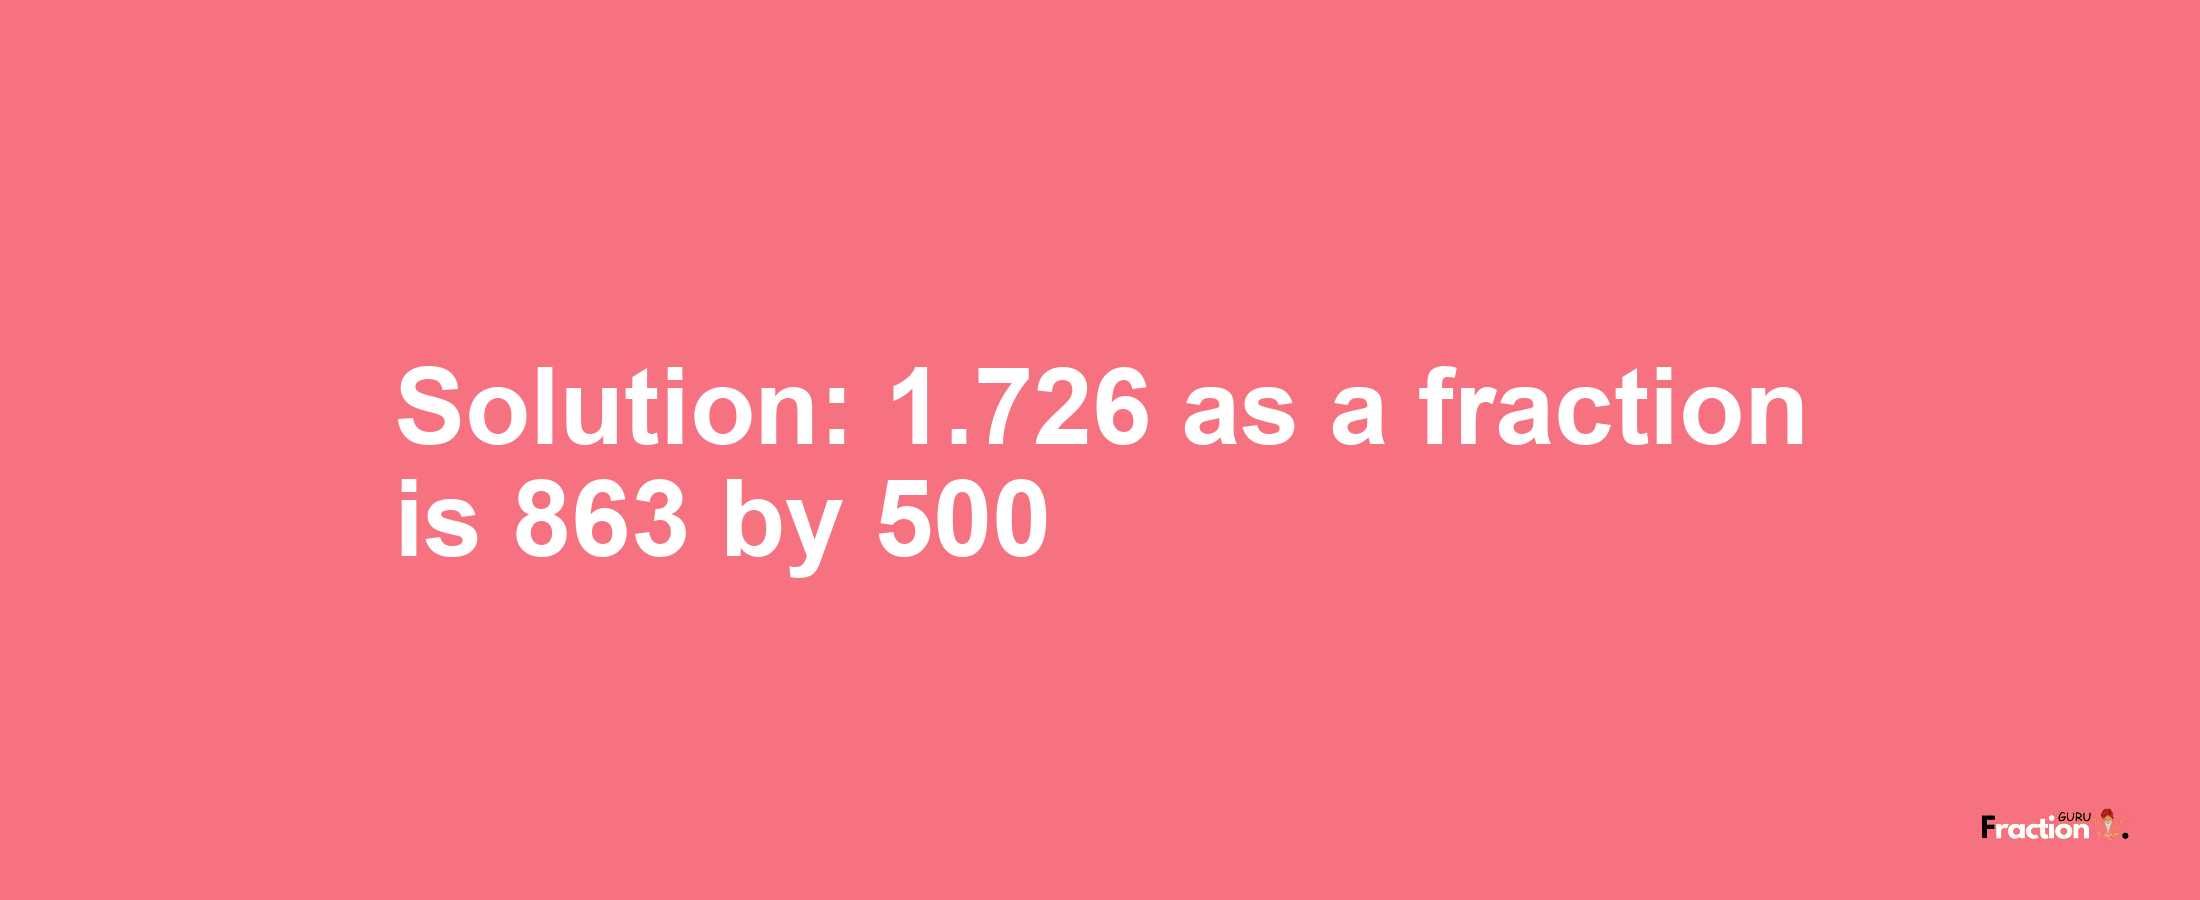 Solution:1.726 as a fraction is 863/500